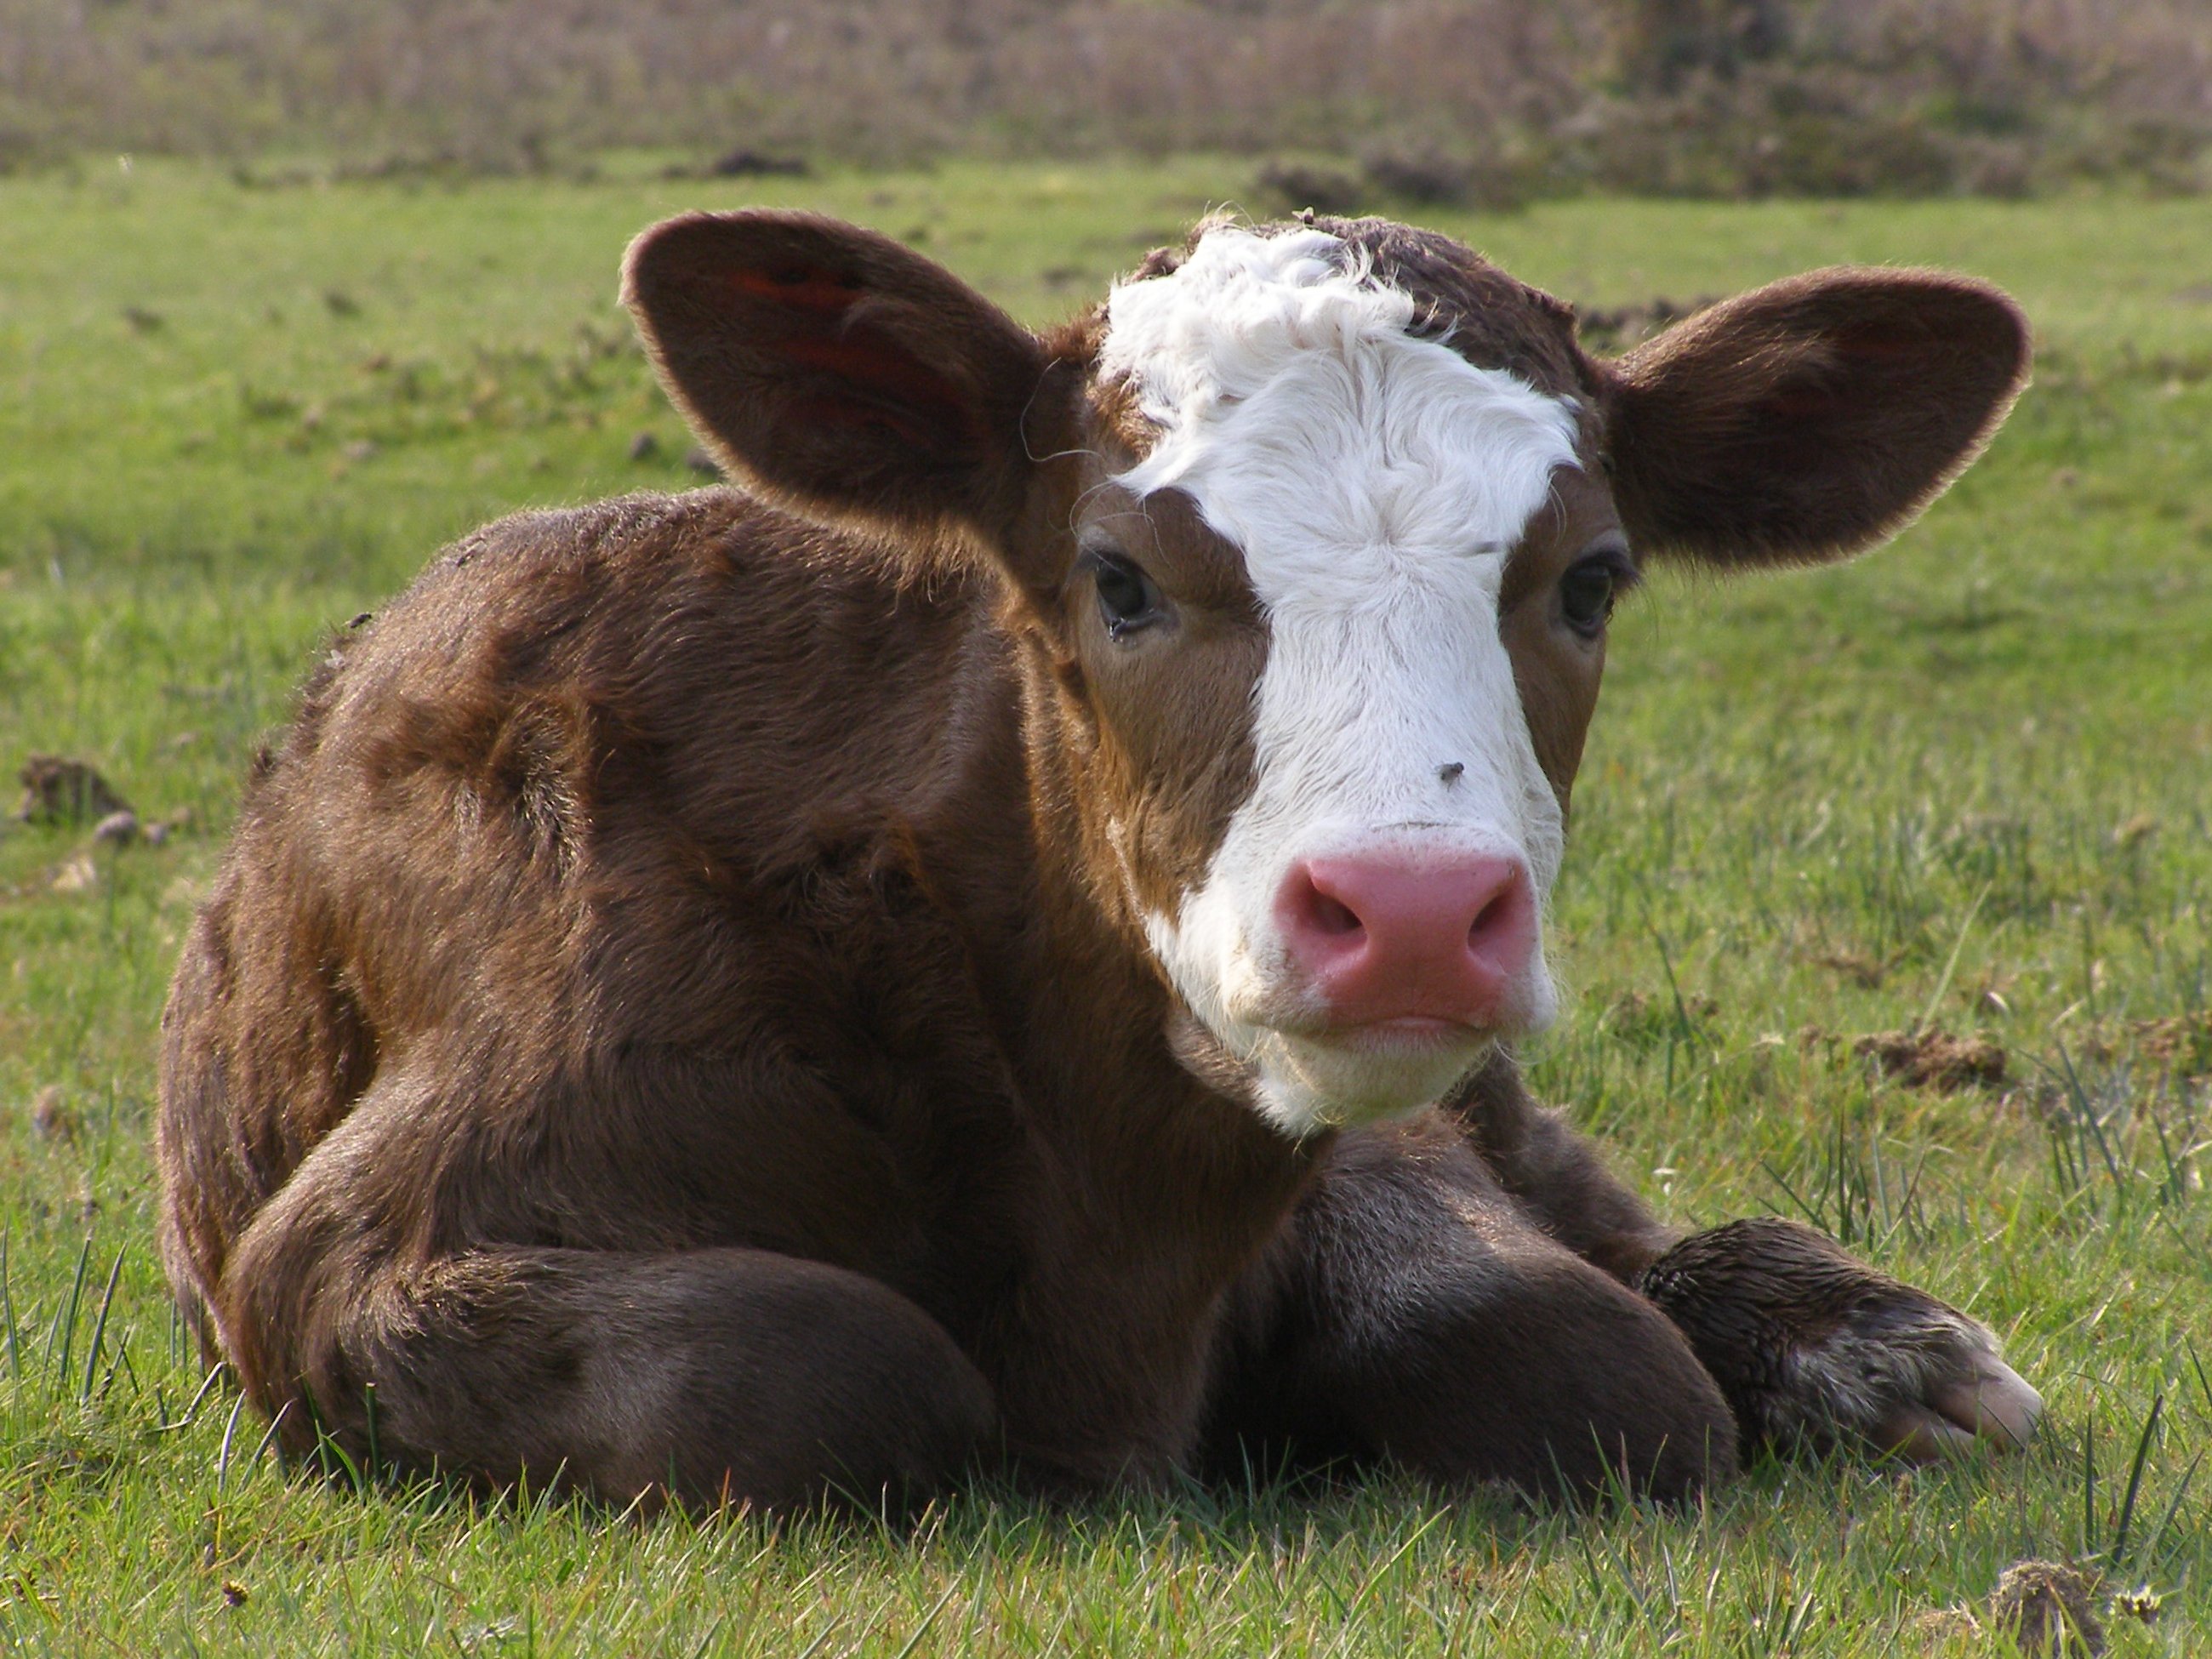 Cattle rearing - The importance of colostrum to newborn calves